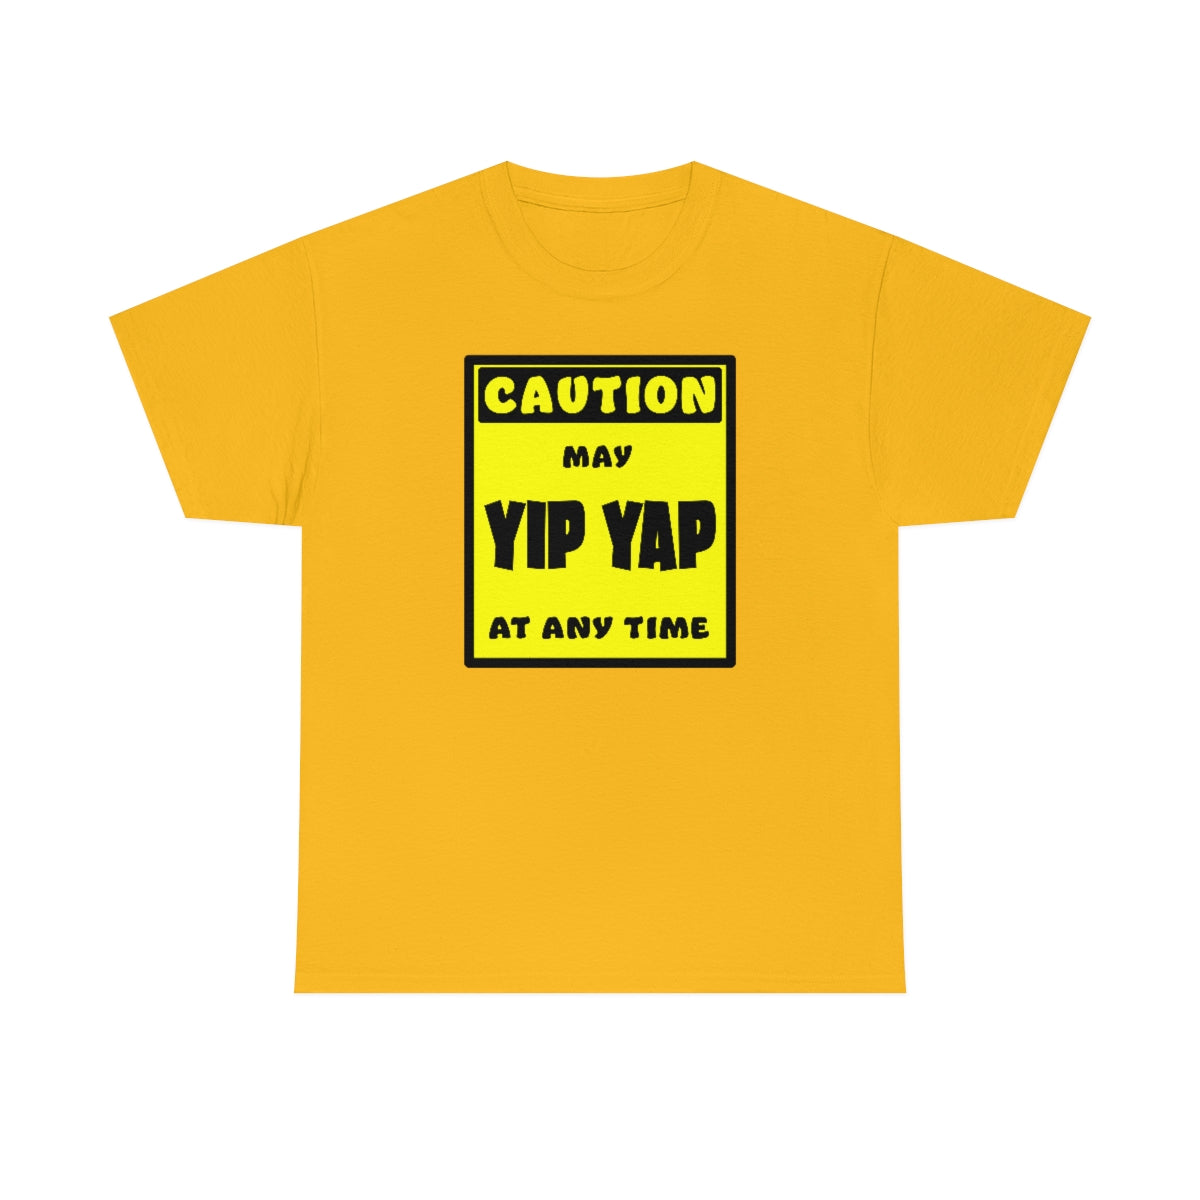 CAUTION! May Yip Yap at any time! - T-Shirt T-Shirt AFLT-Whootorca Gold S 